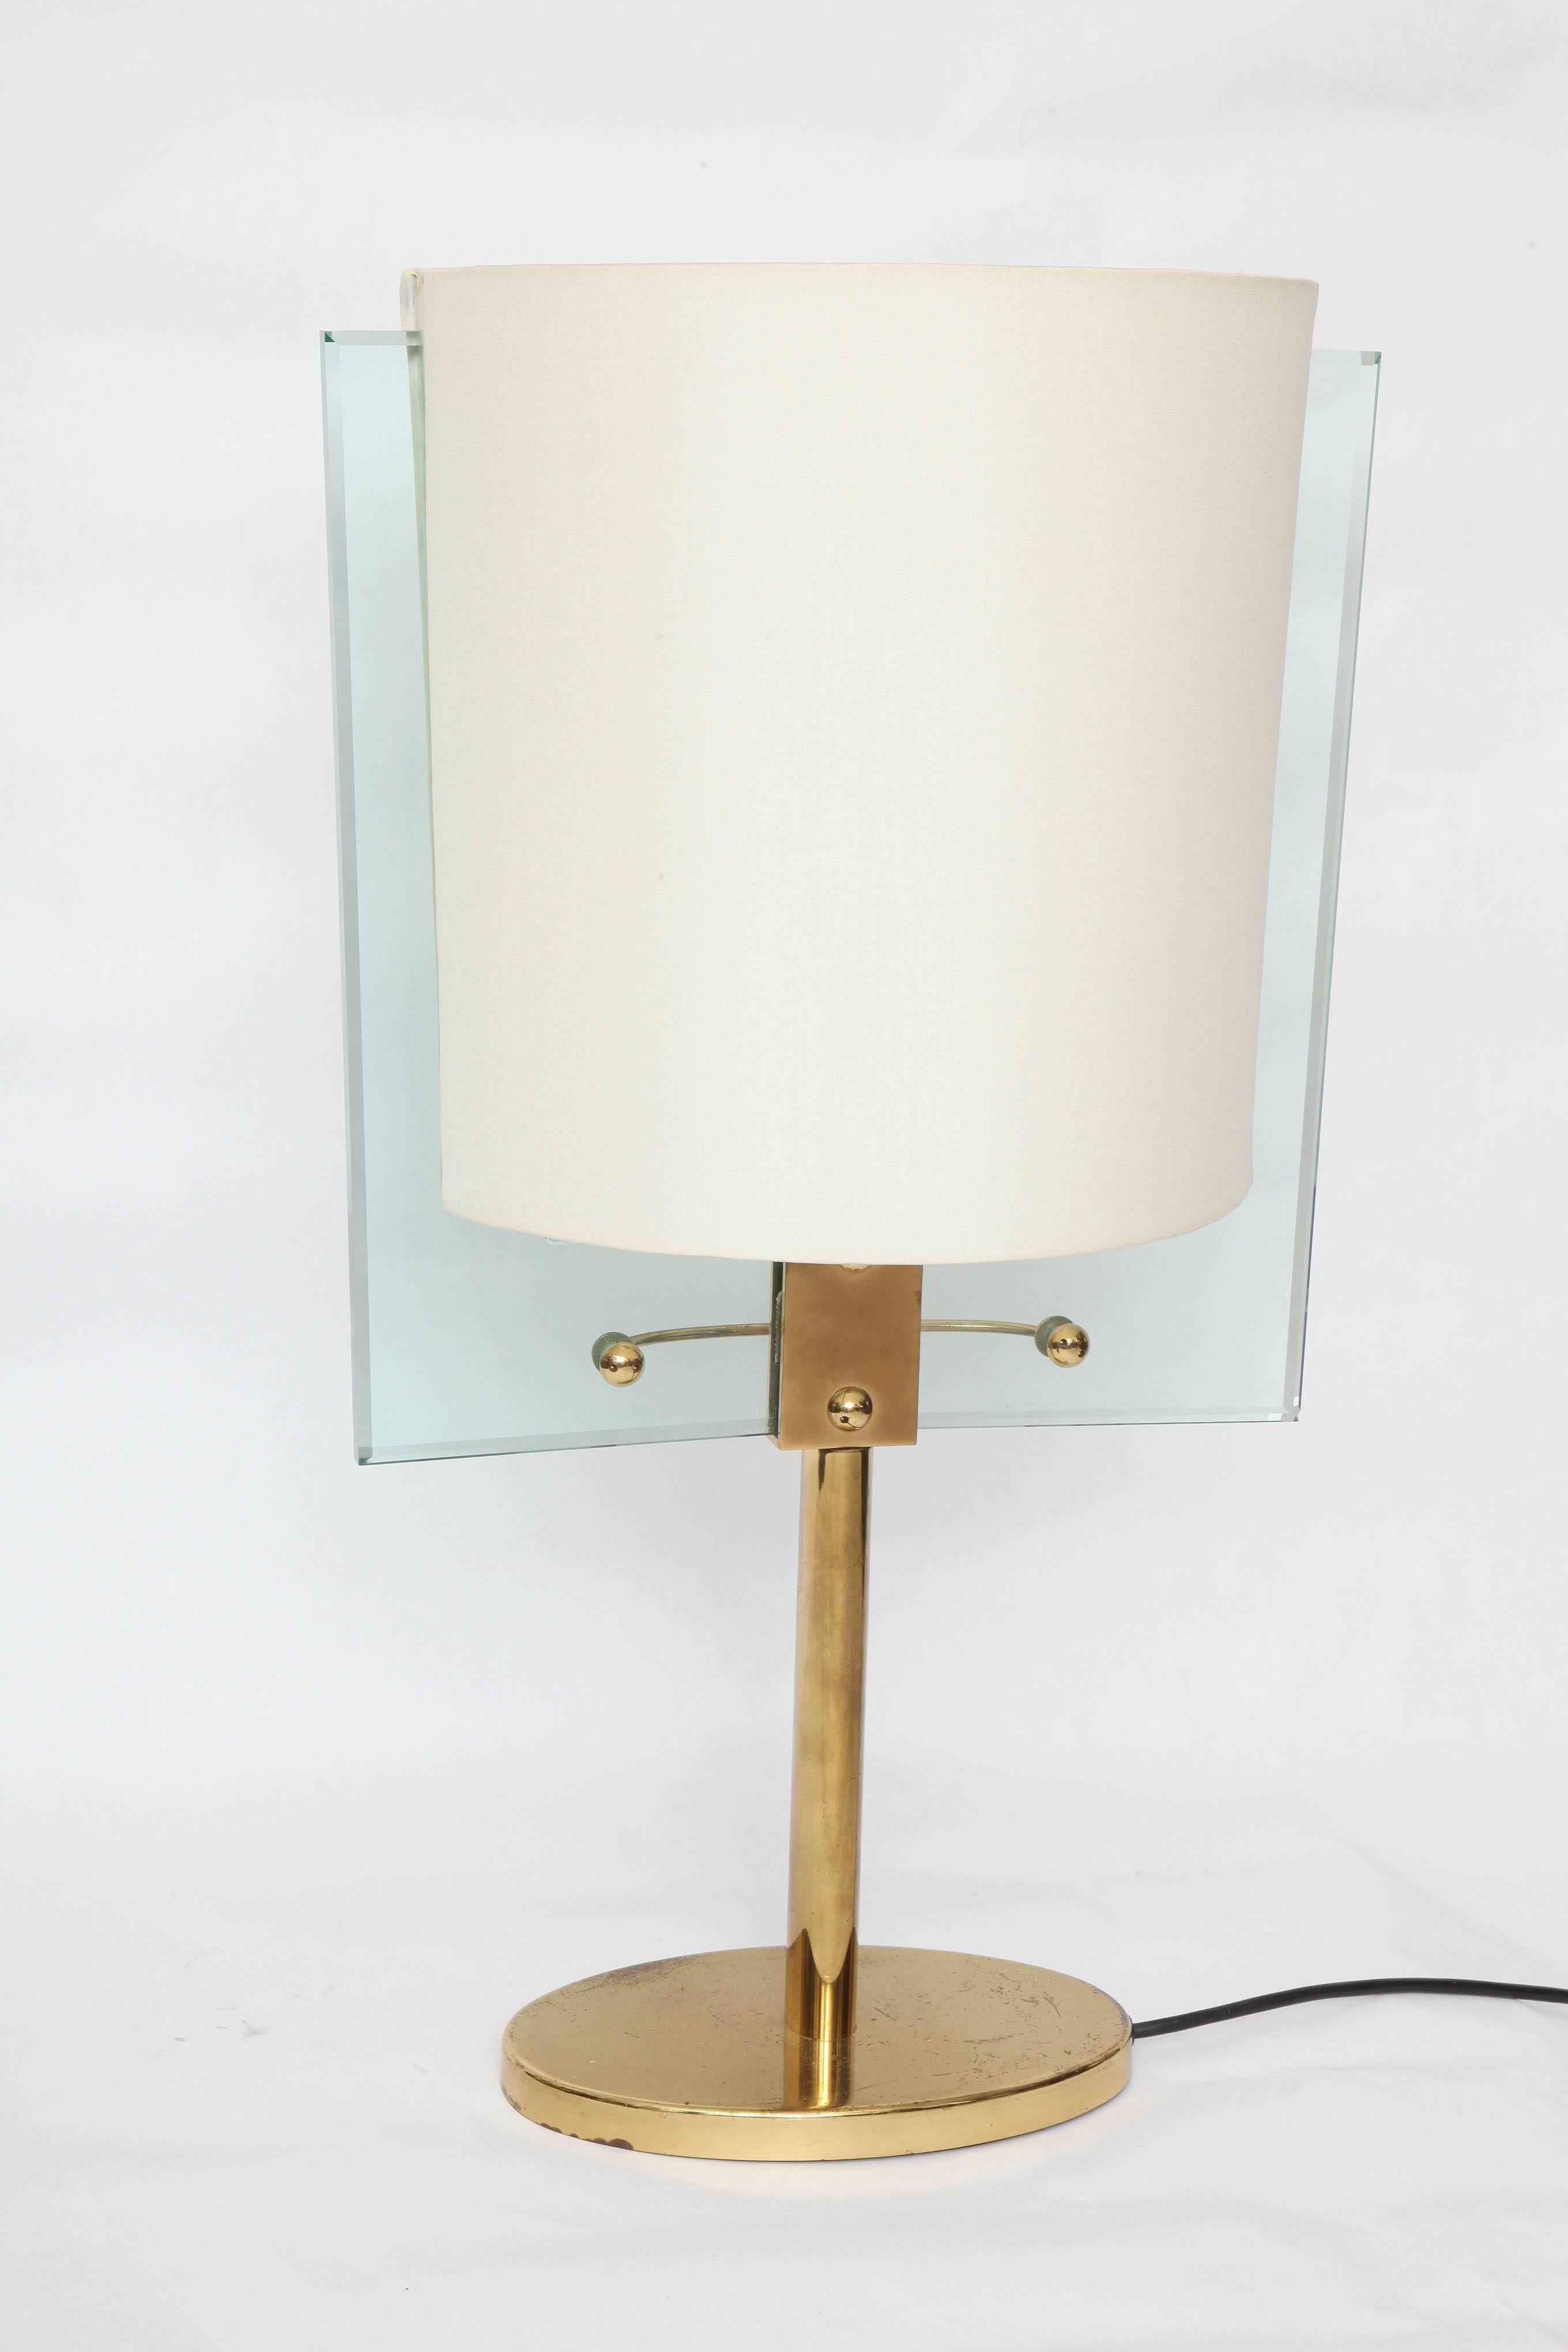 A Italian glass and brass table lamp by Fontana Arte designed by Nathalie Grenon.
  